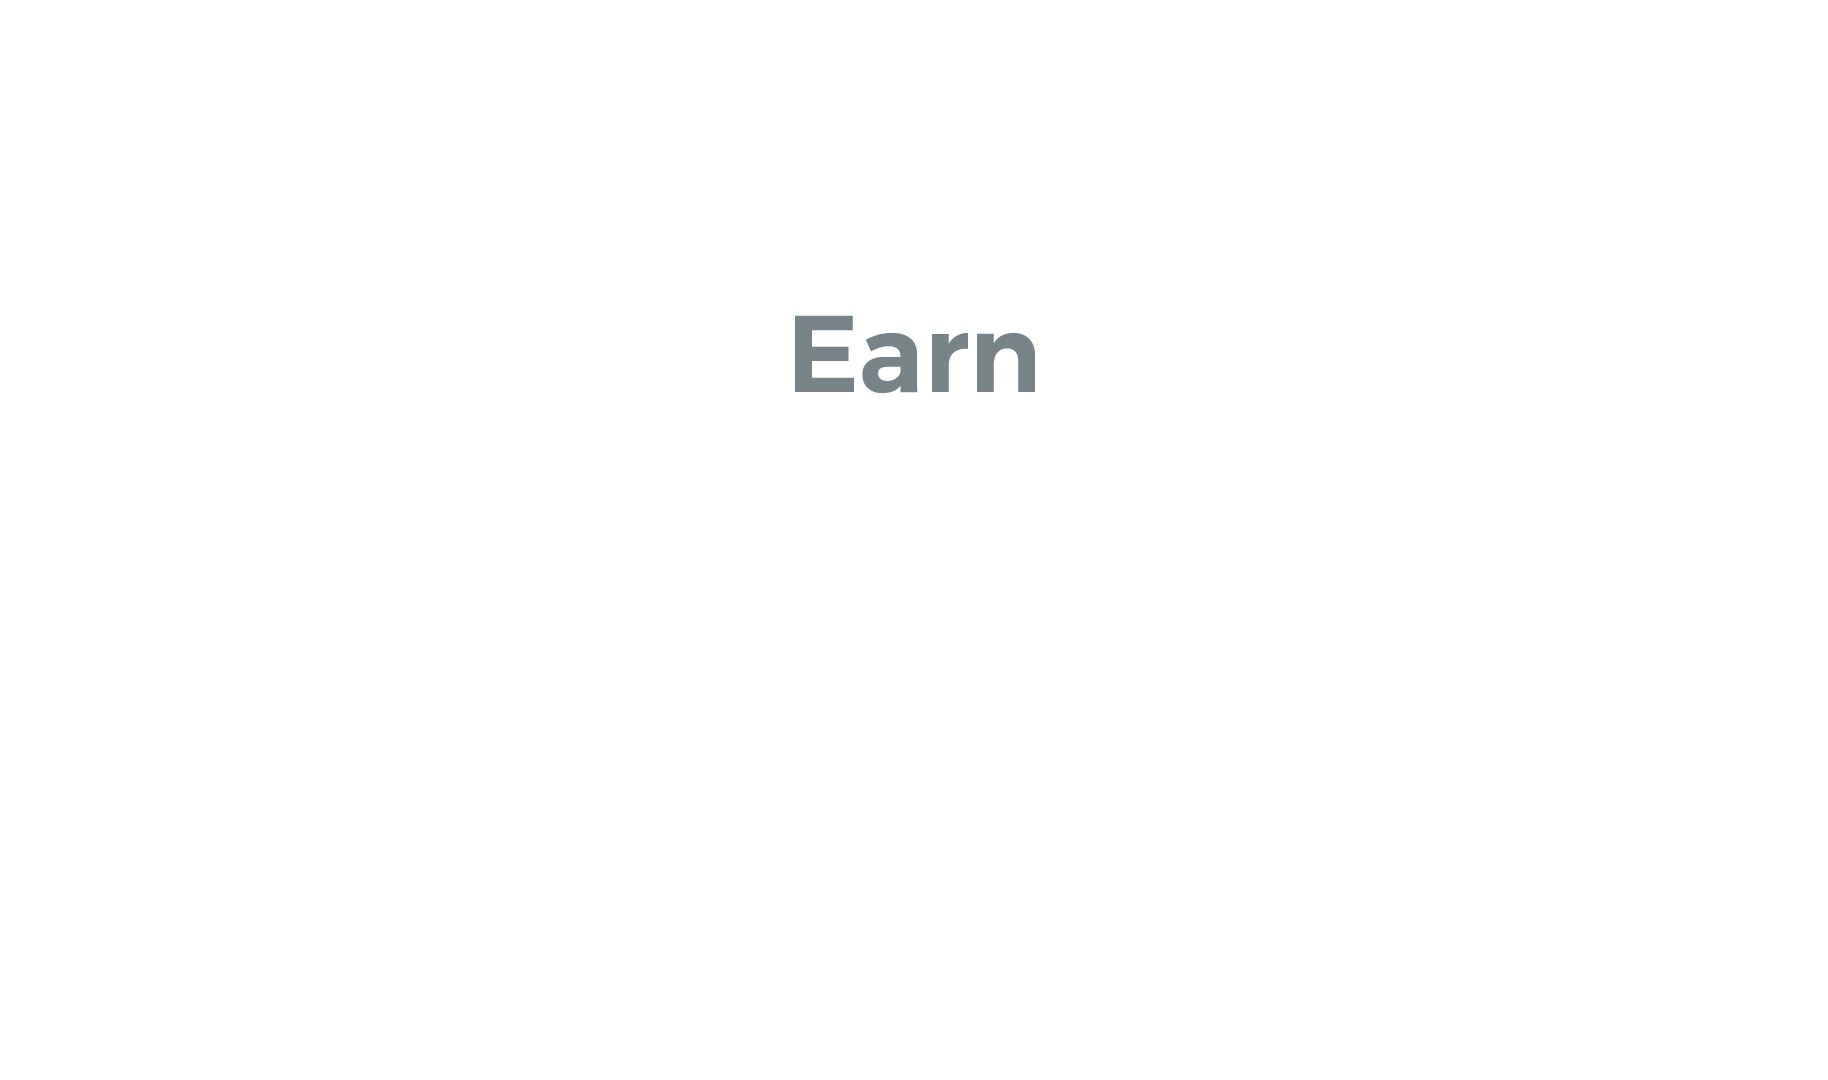 Special 8 Month CD Account Offer